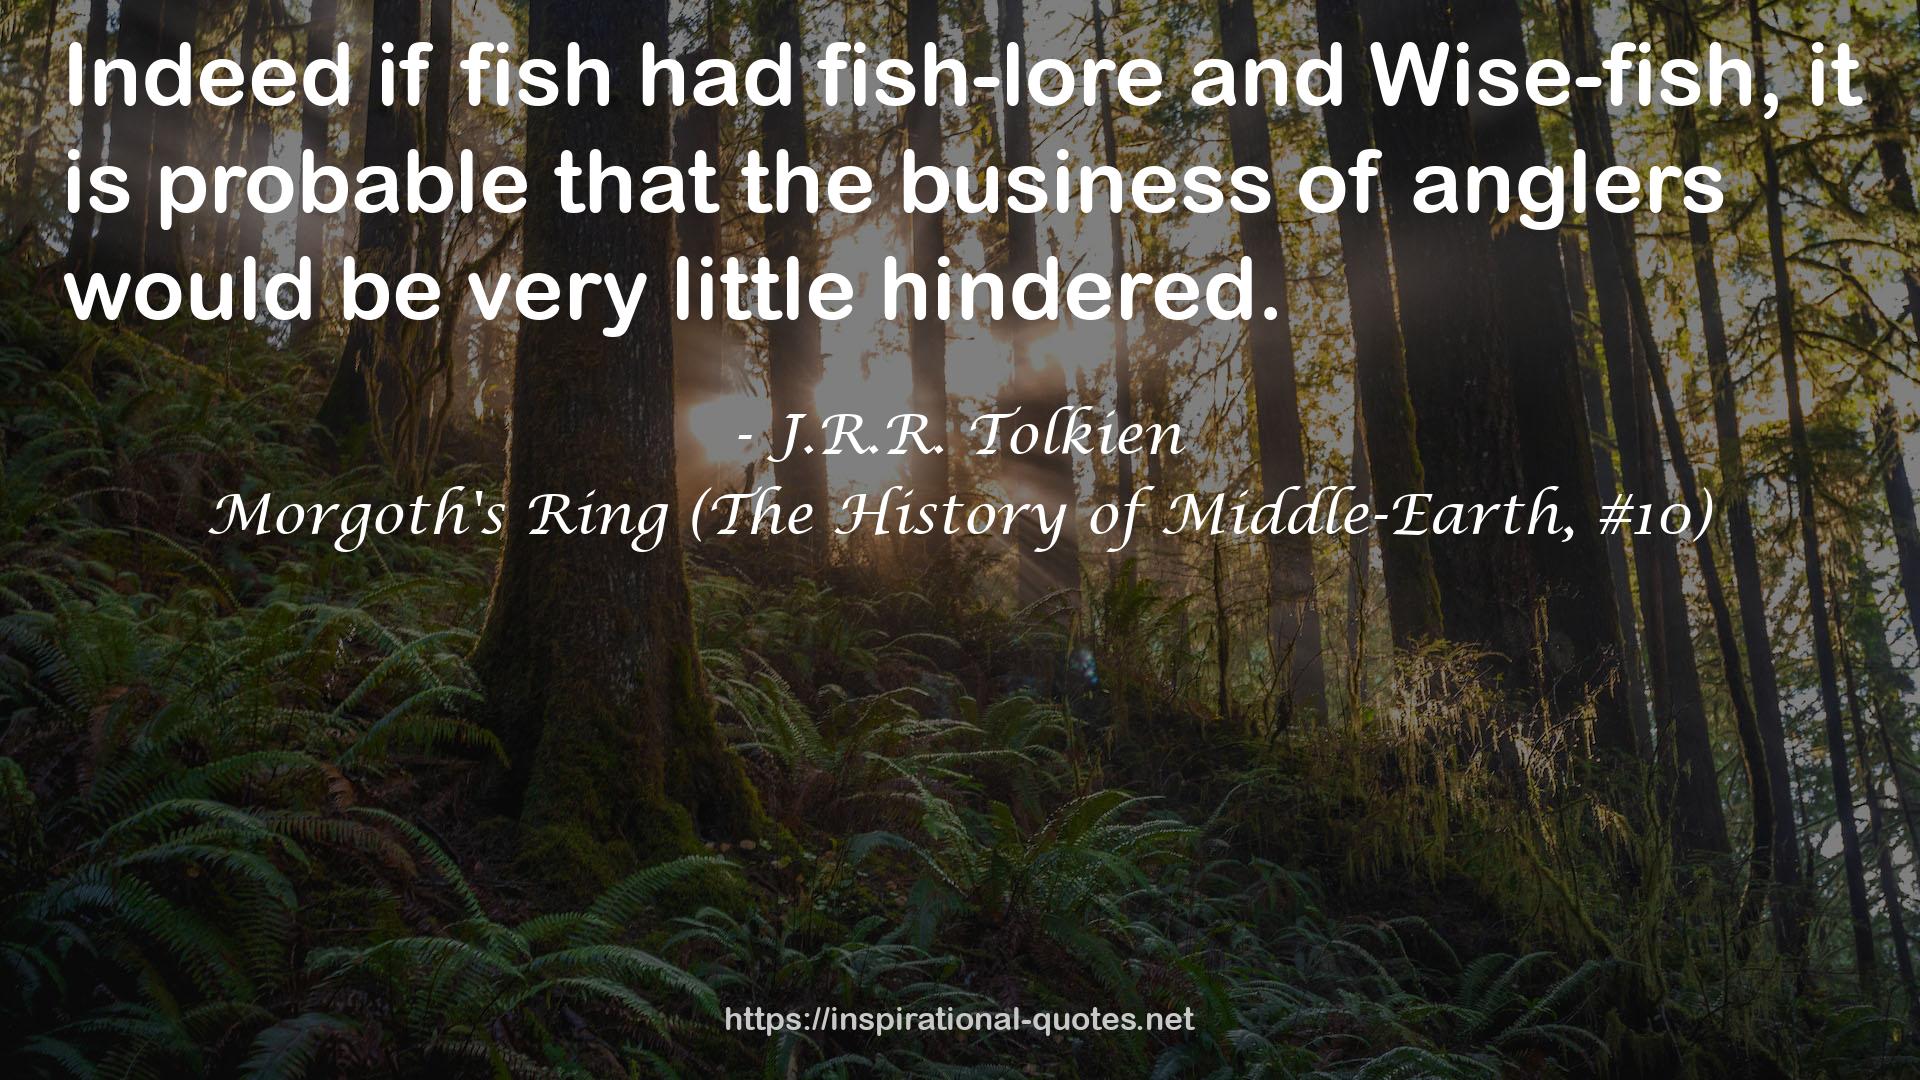 Morgoth's Ring (The History of Middle-Earth, #10) QUOTES